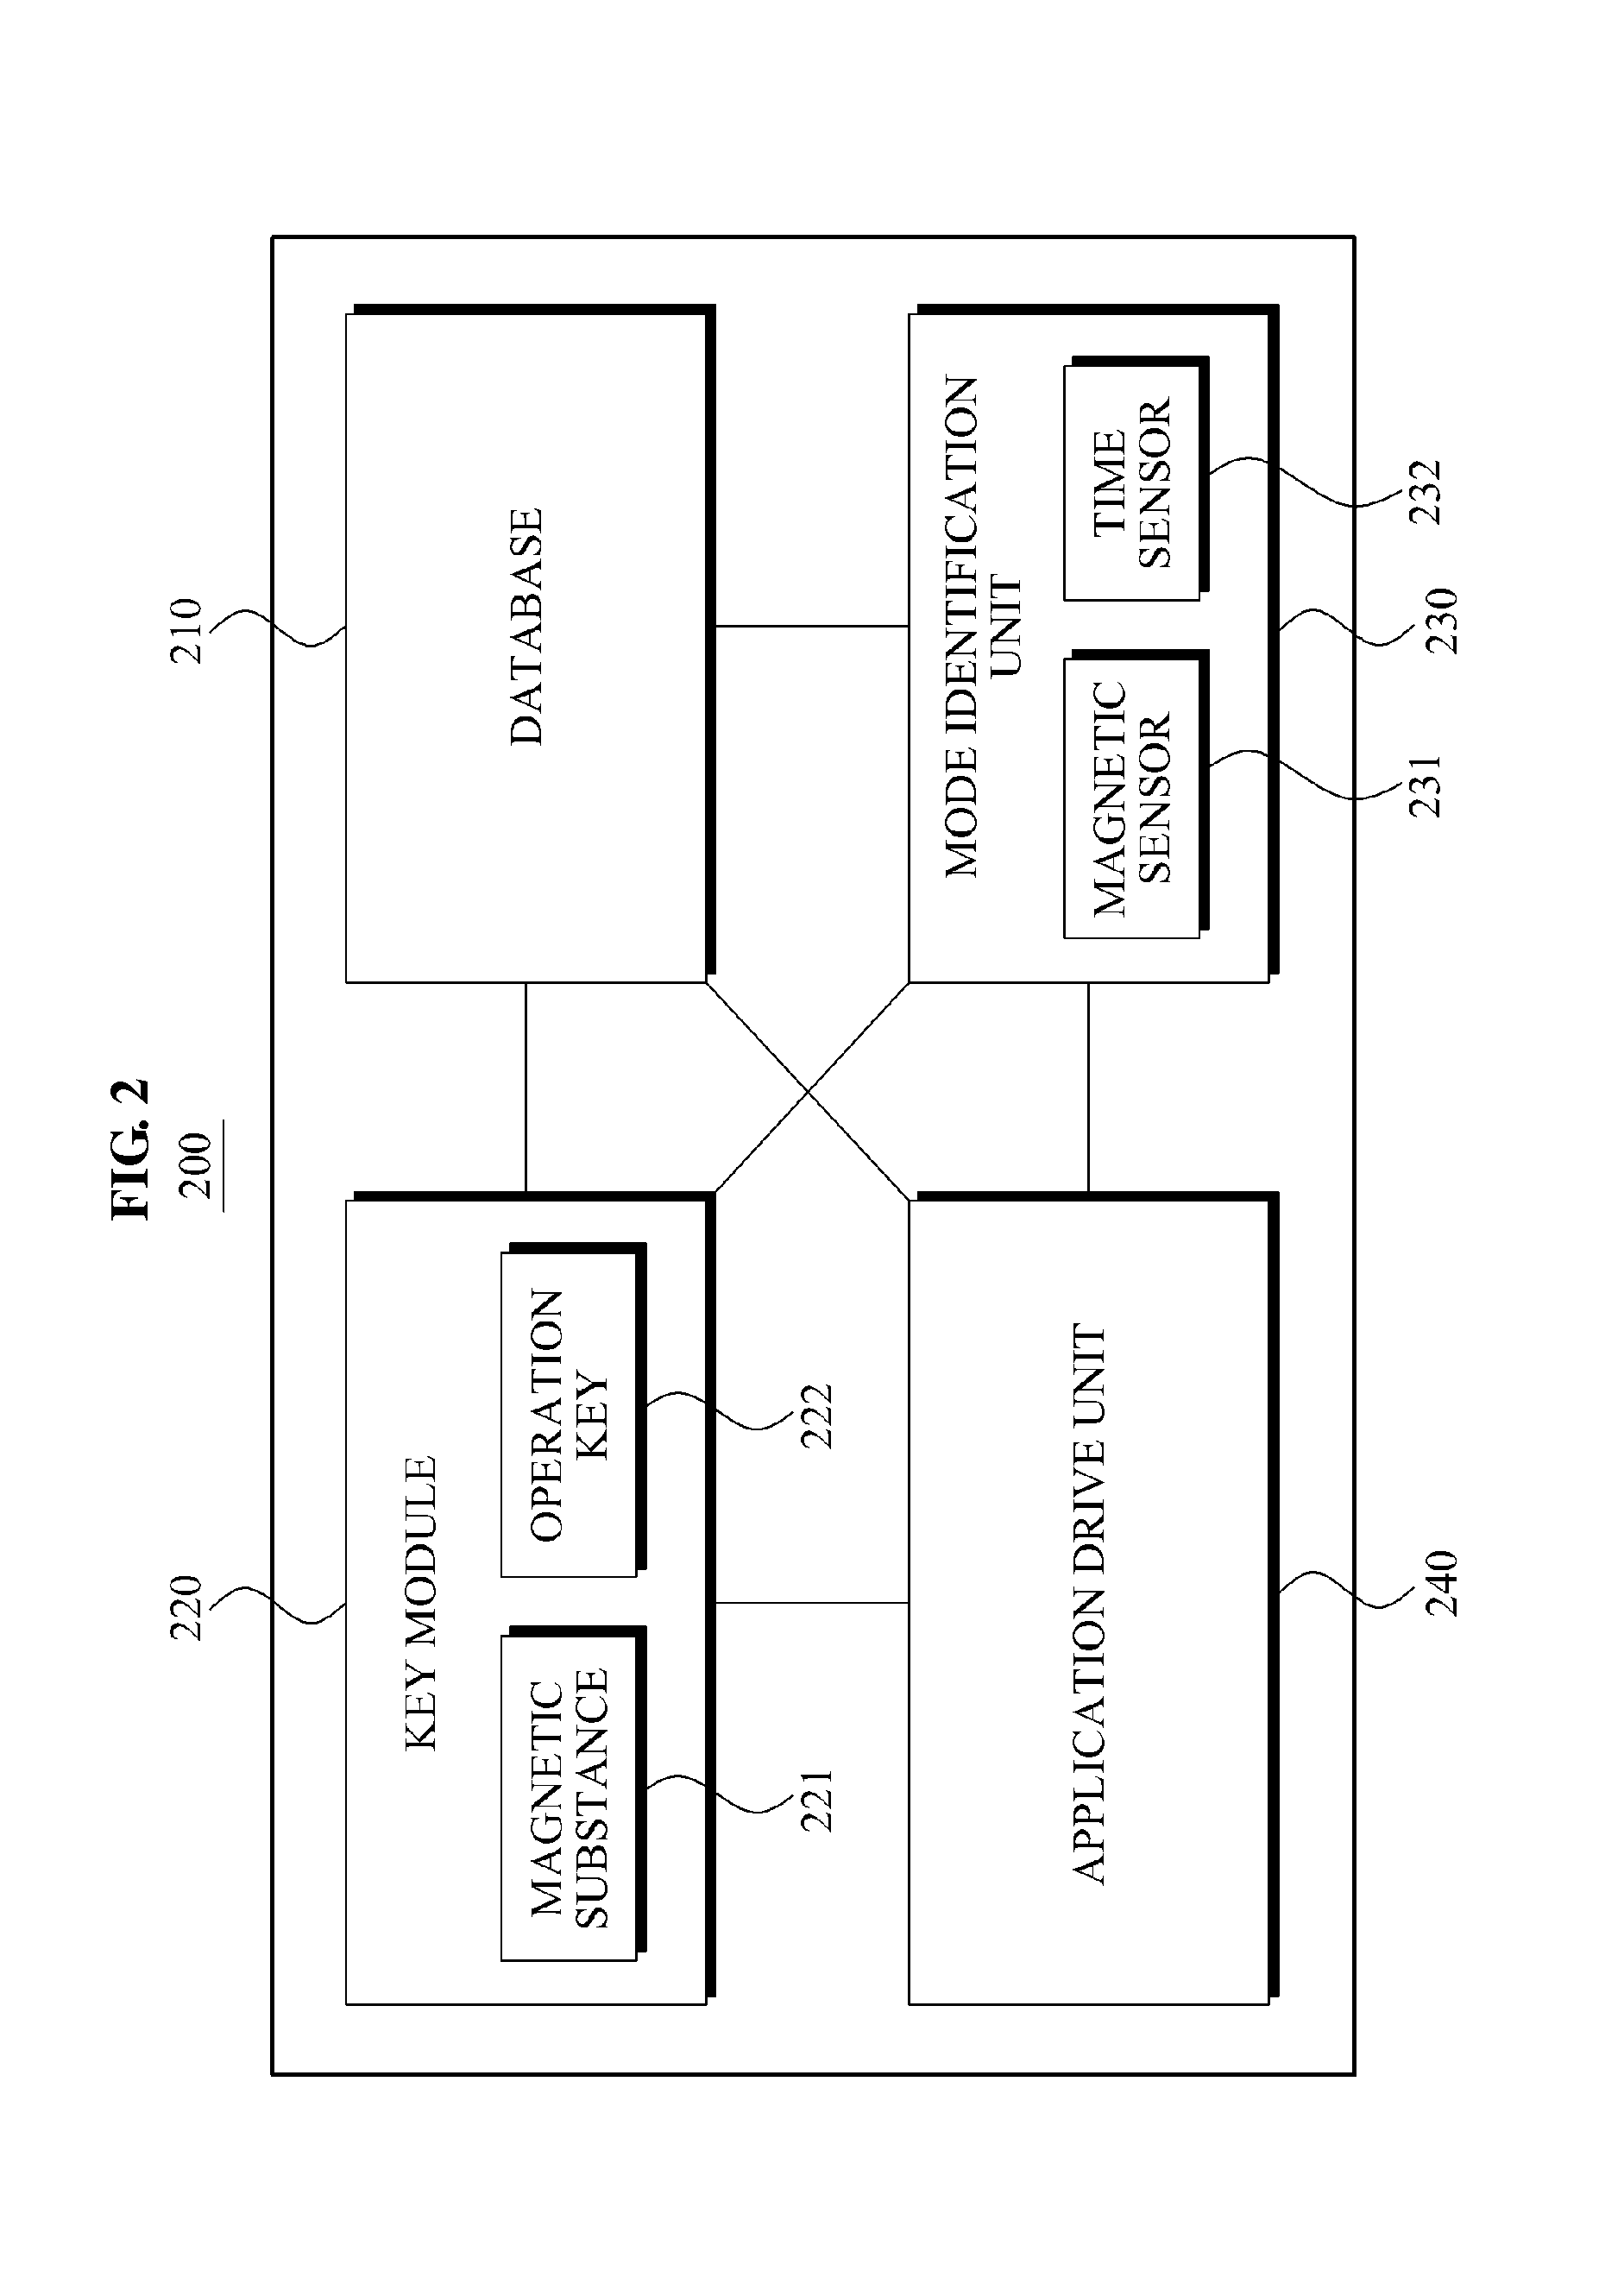 Mobile terminal and method for controlling the mobile terminal